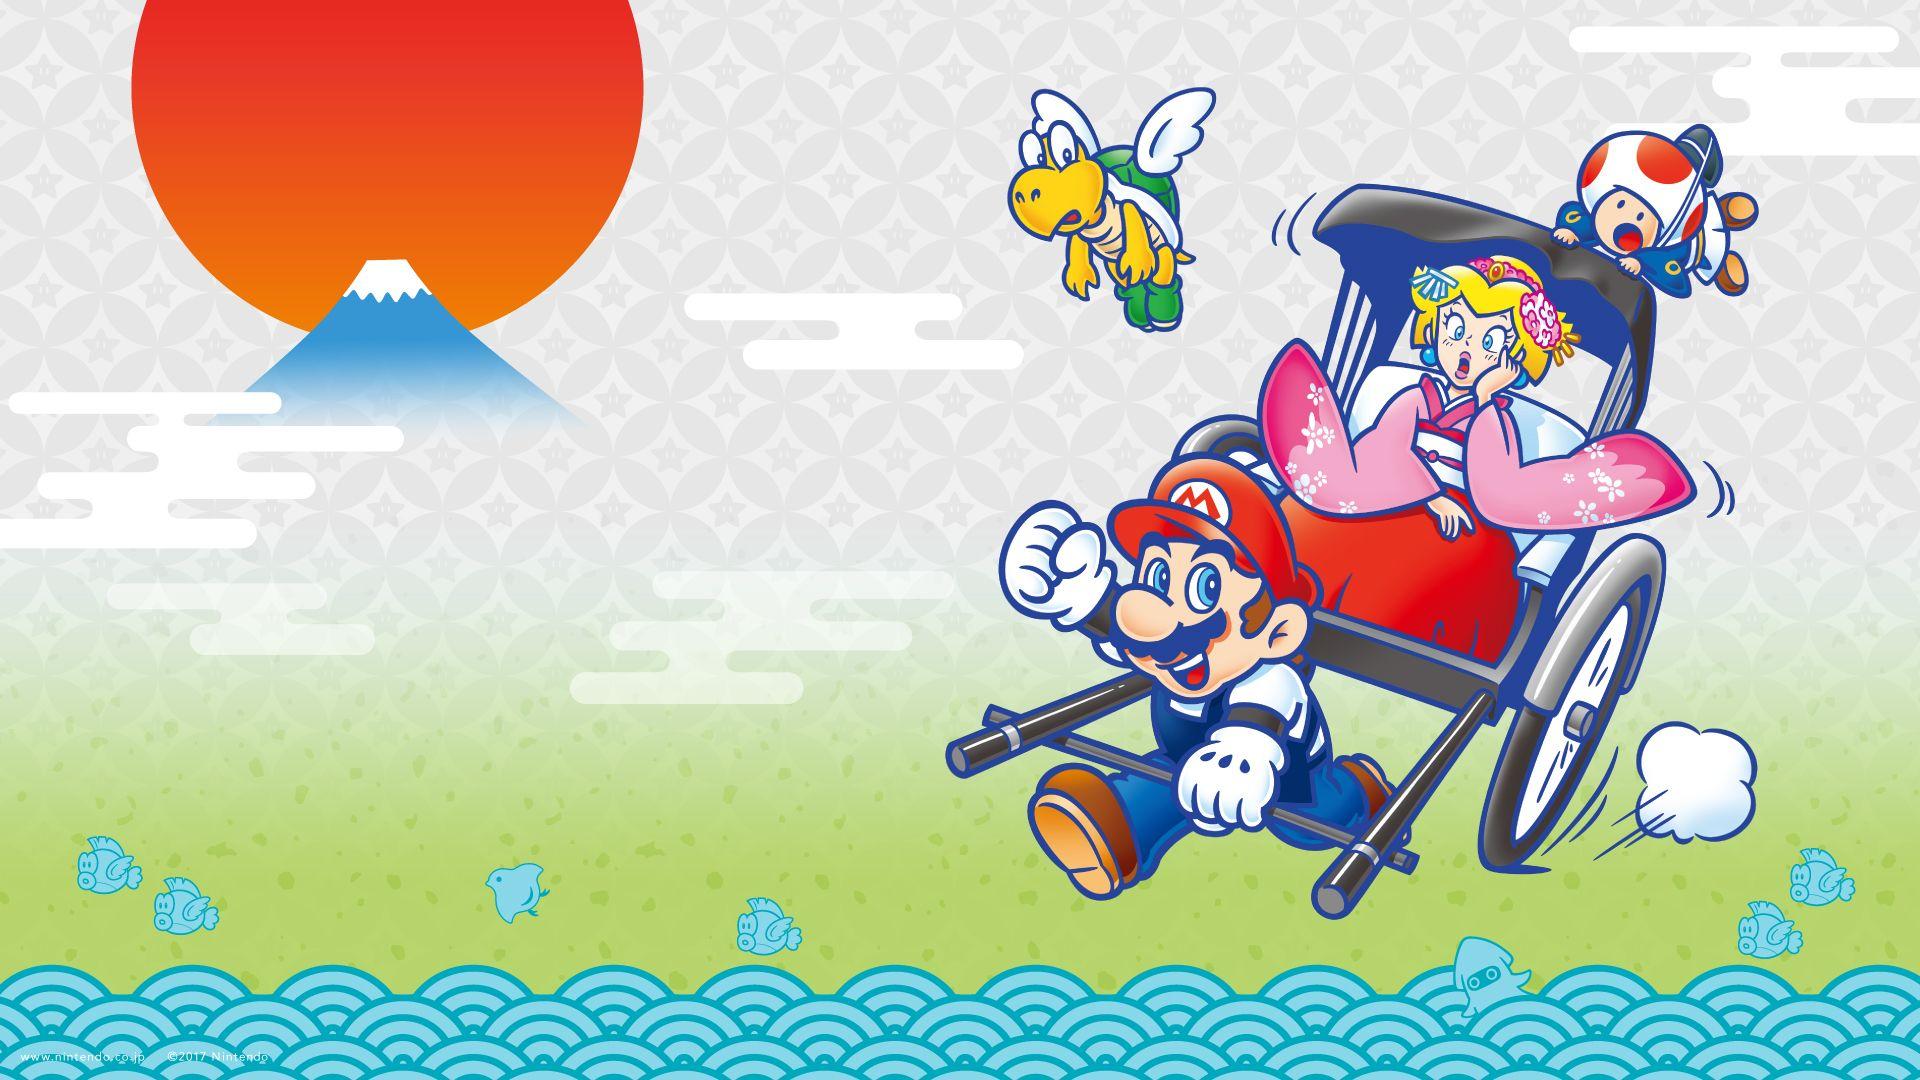 Nintendo Japan celebrates the new year with a new Mario themed